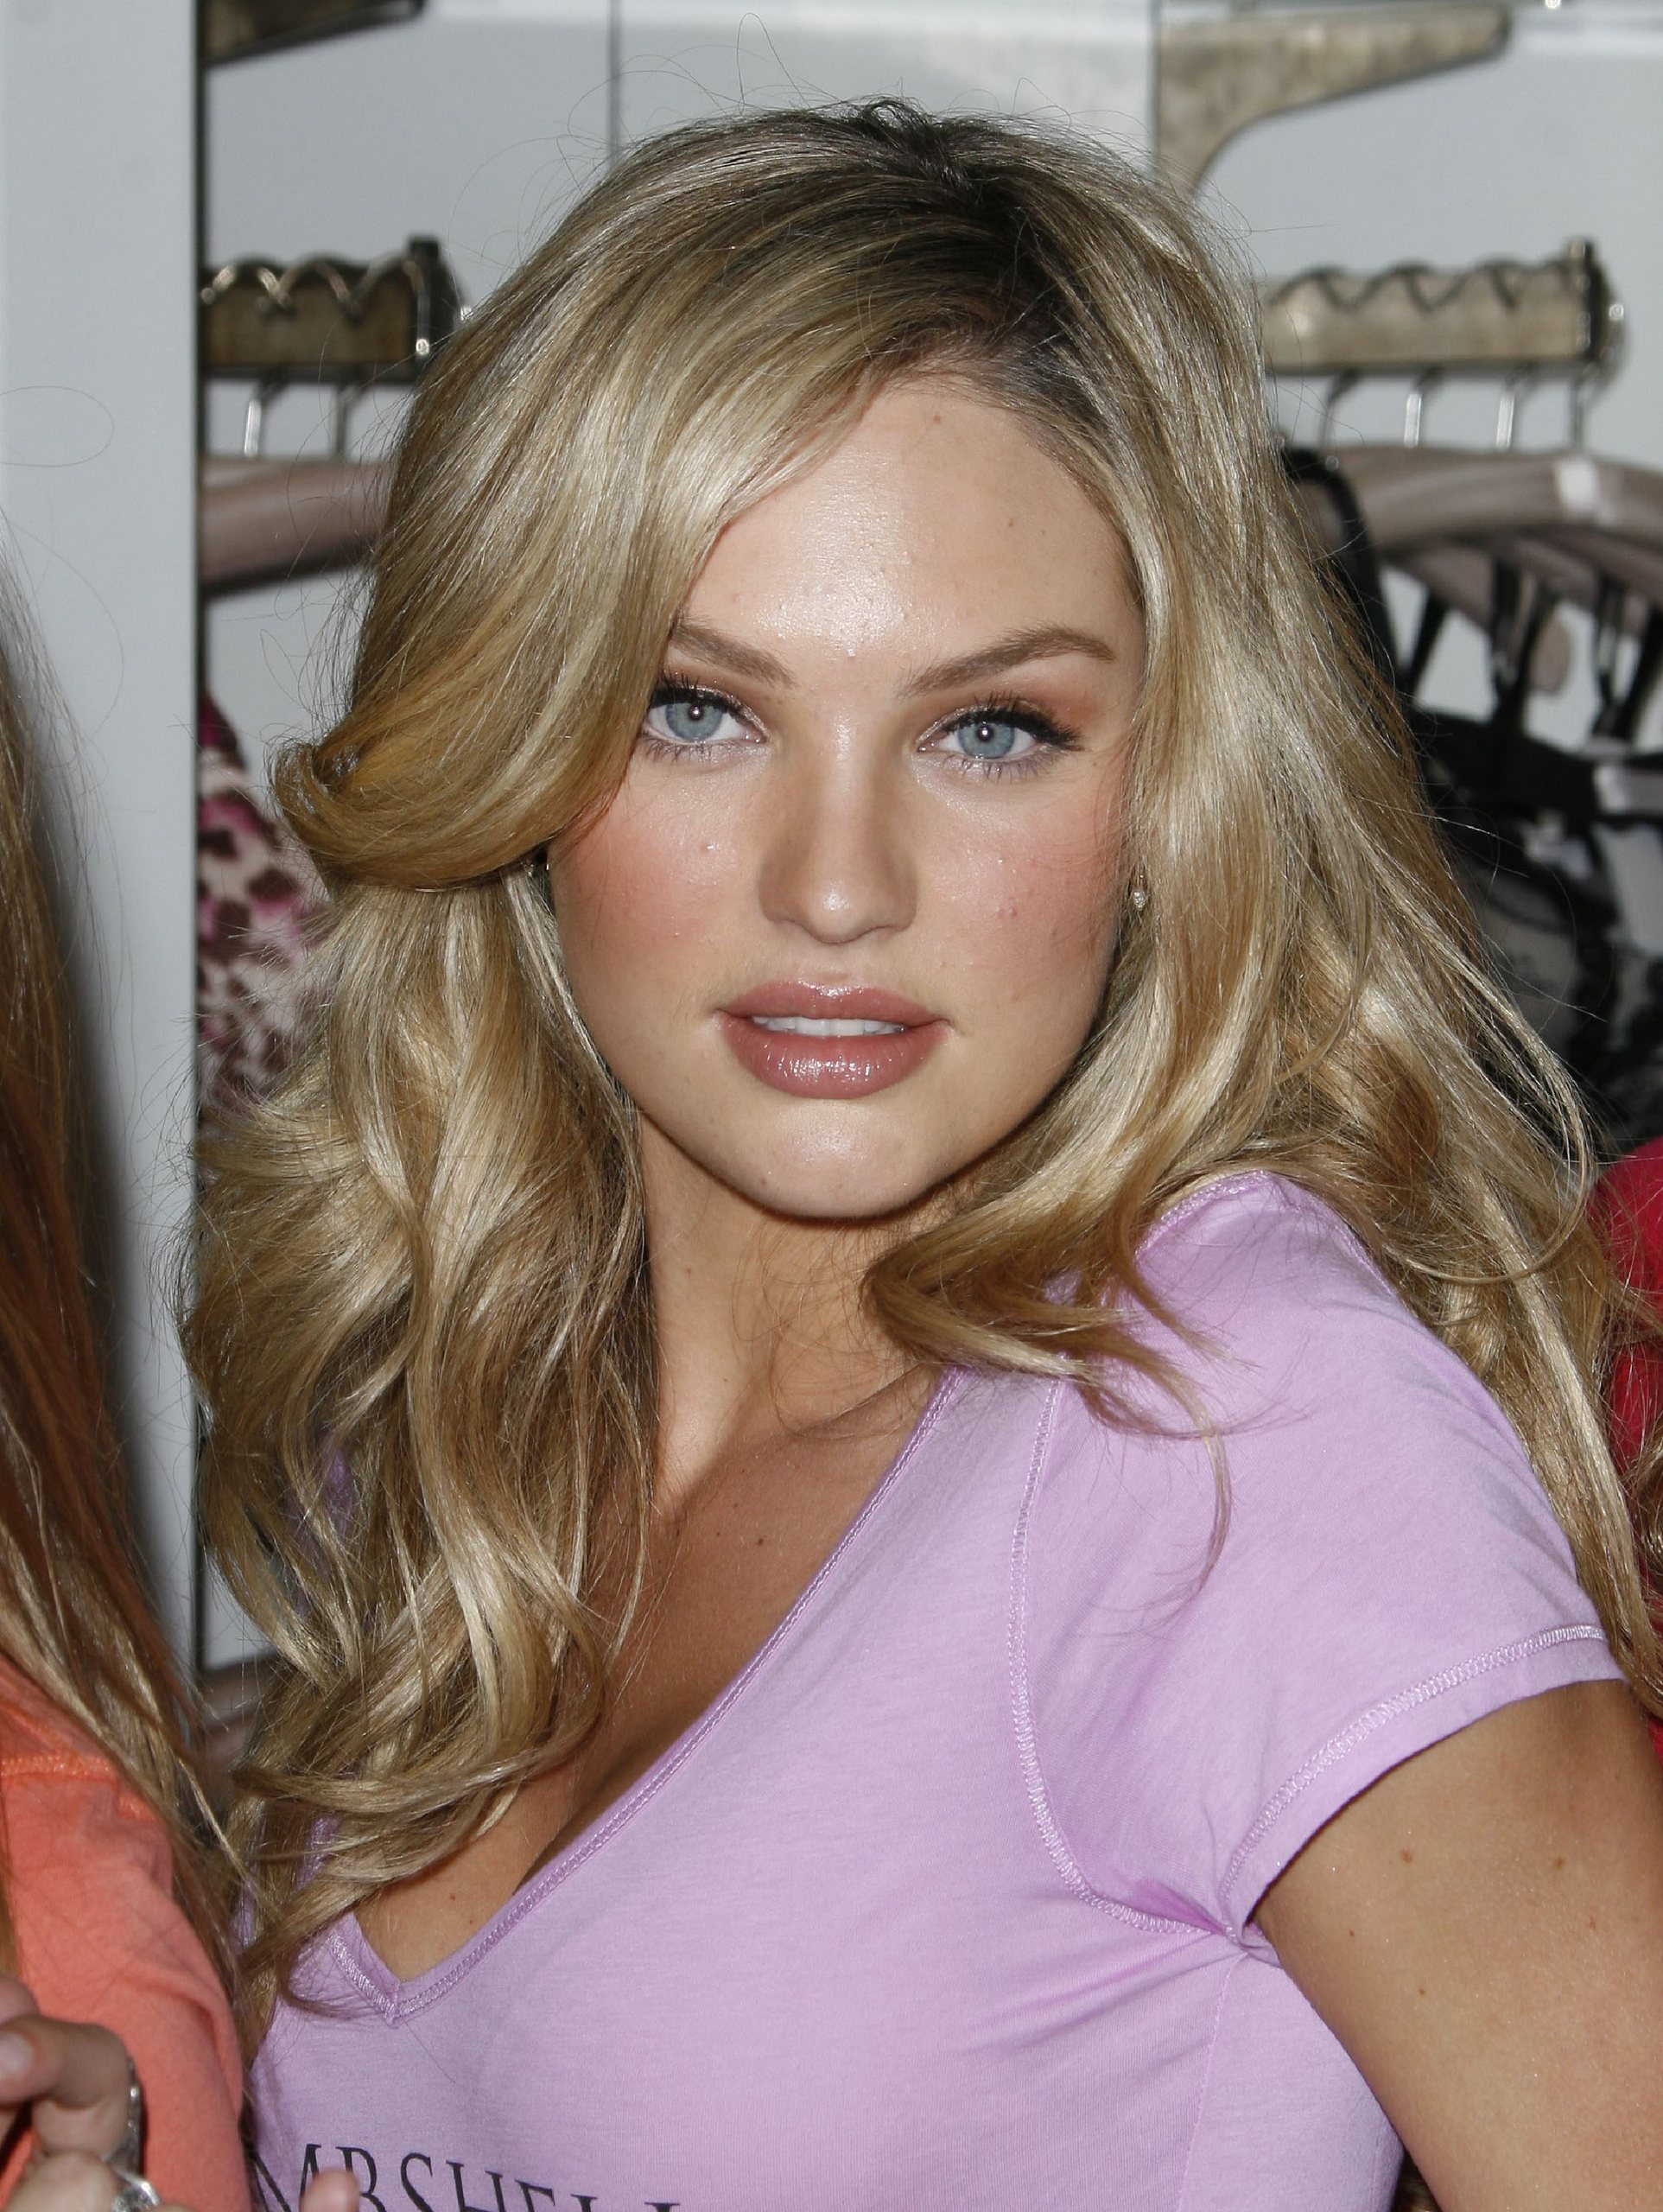 Candice Swanepoel Images on Fanpop.